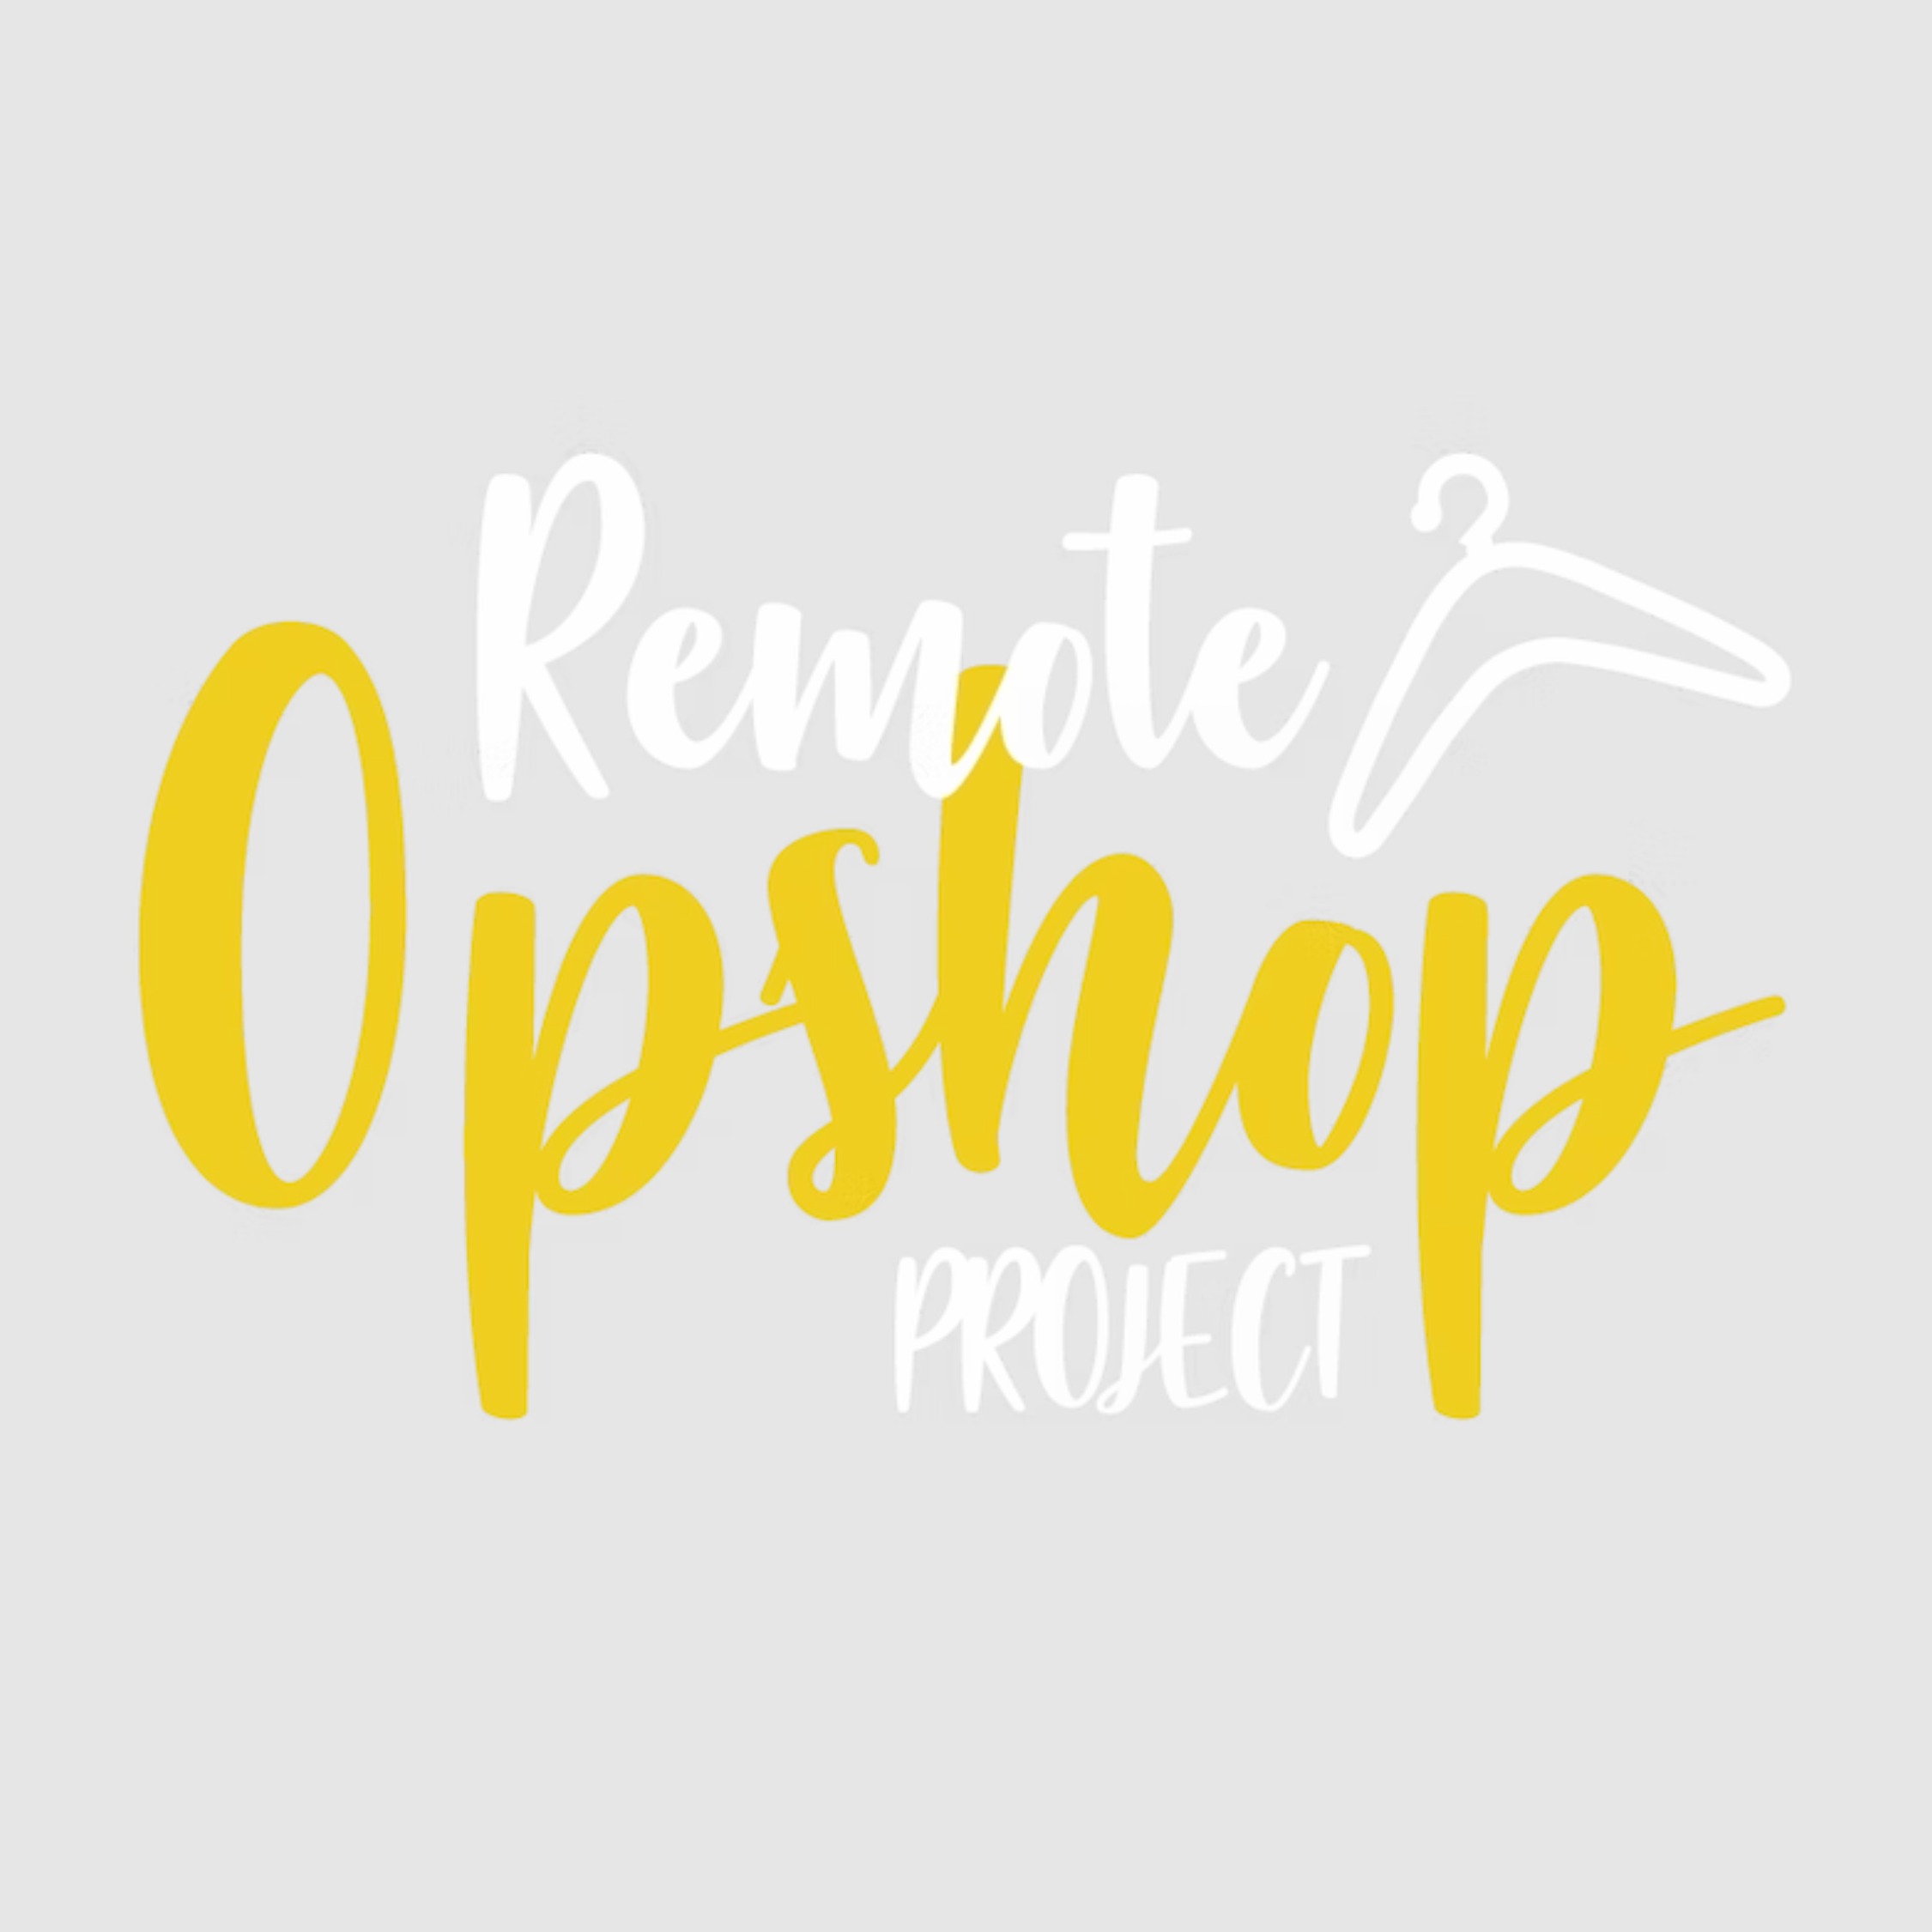 Remote OpShop Project  Logo